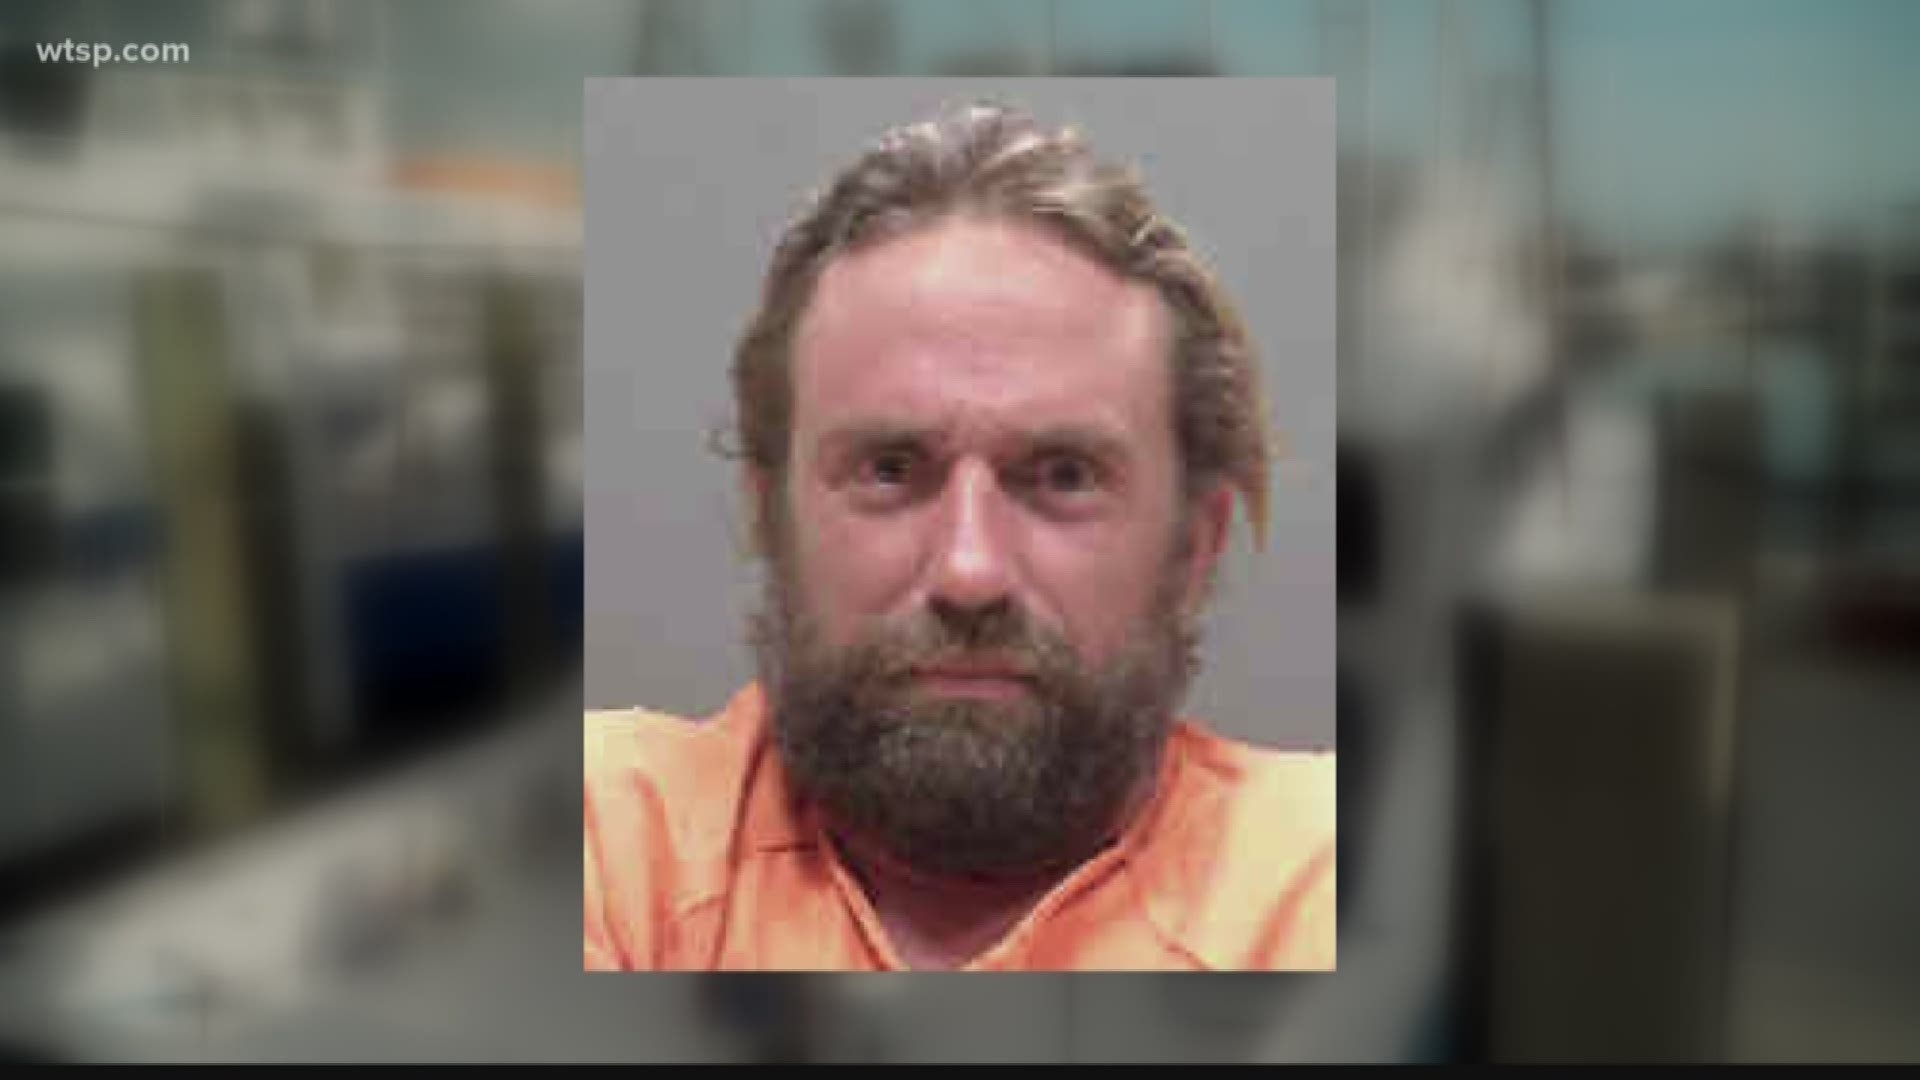 Police documents suggest a charter boat captain went on a drunken, drug-infused tirade and threatened to shoot everyone on his boat during a nightmare fishing trip.

10News obtained a police summary and witness statements that paint a disturbing picture of what should have been a 12-hour fishing excursion Sunday in the Gulf of Mexico.